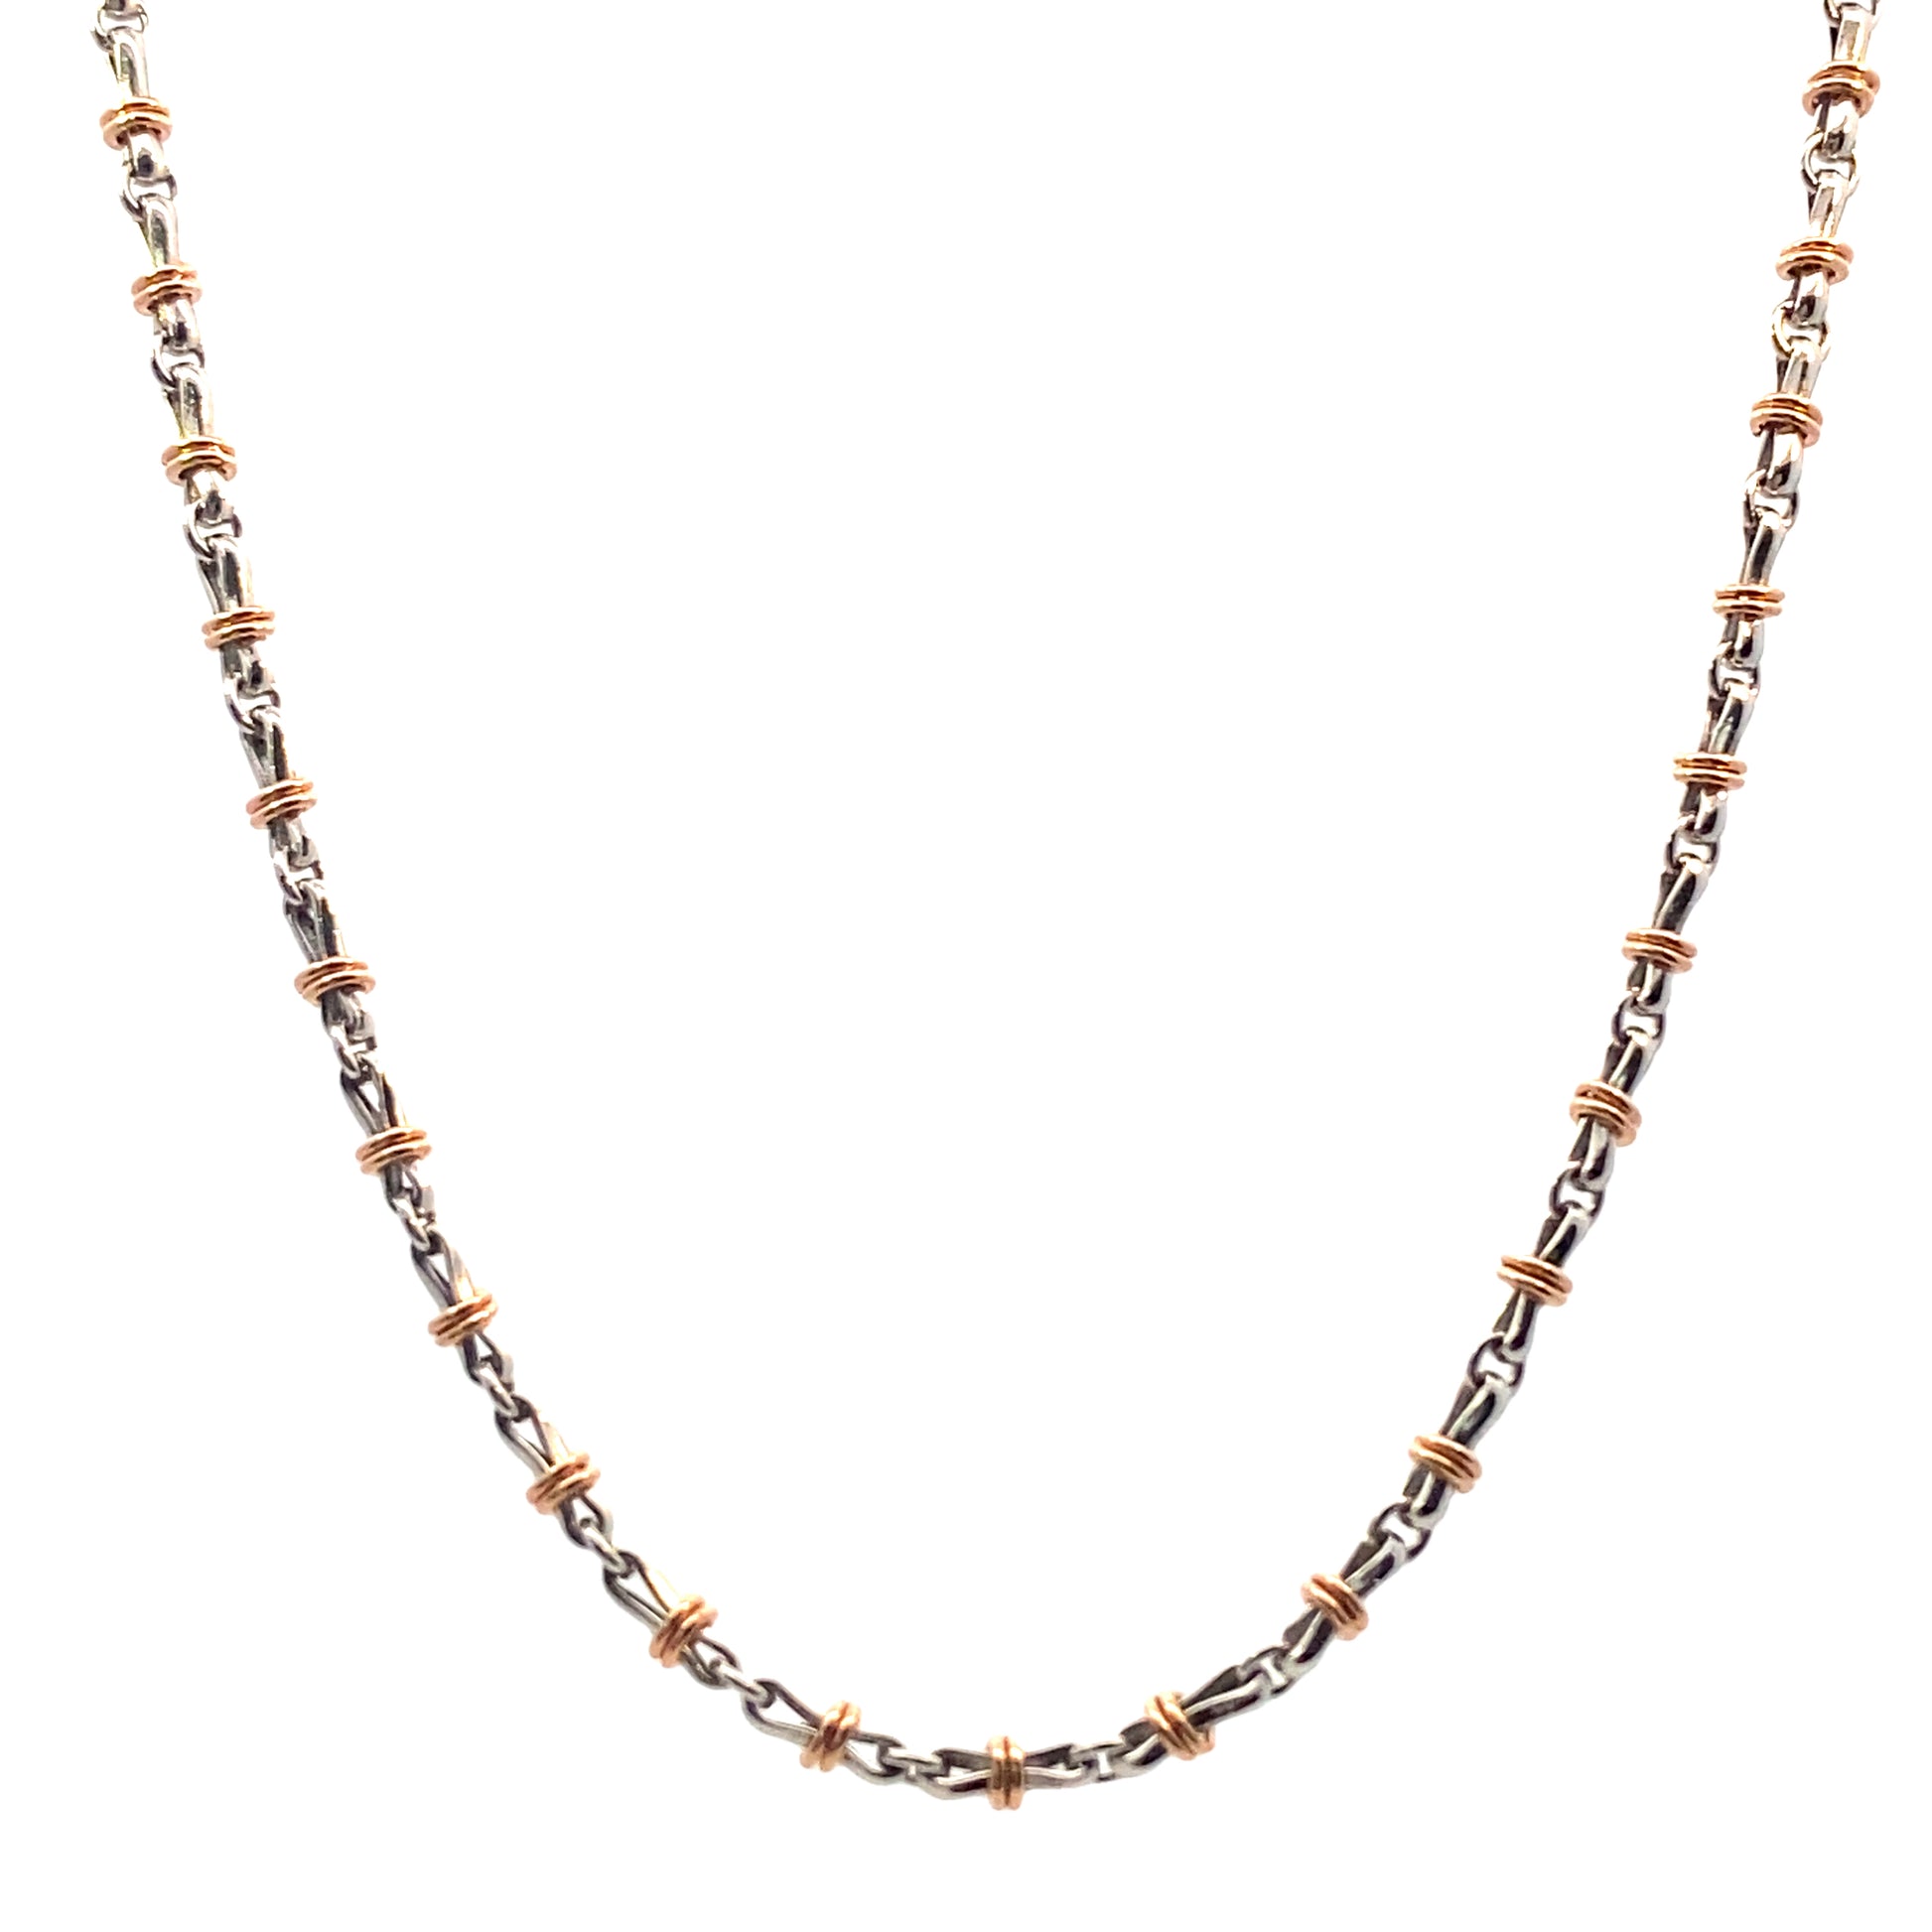 18k Gold Link Chain in White Gold With Rose Gold Hoops in the Center | Zancan | Luby 